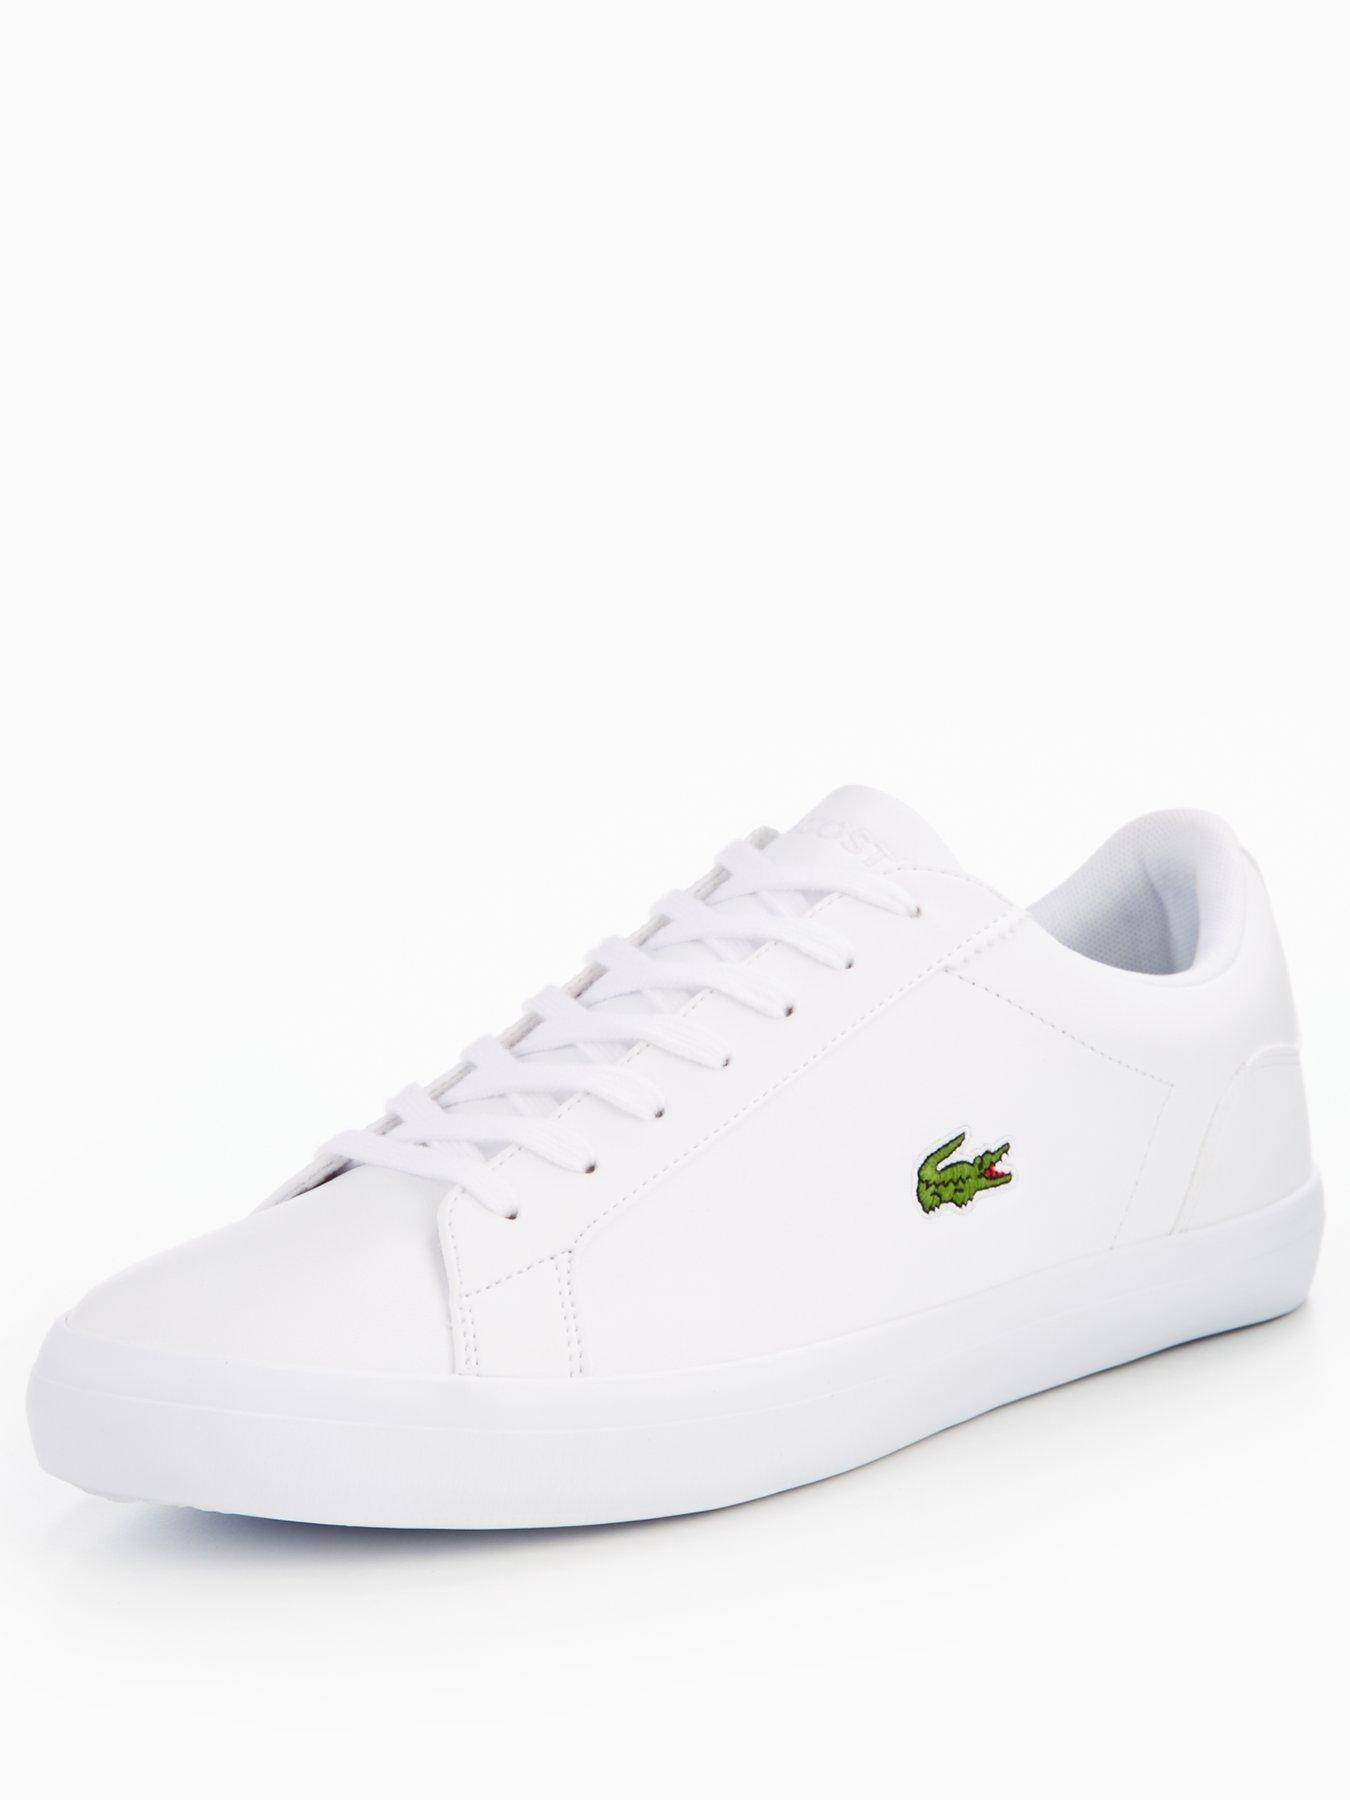 lacoste trainers size 6